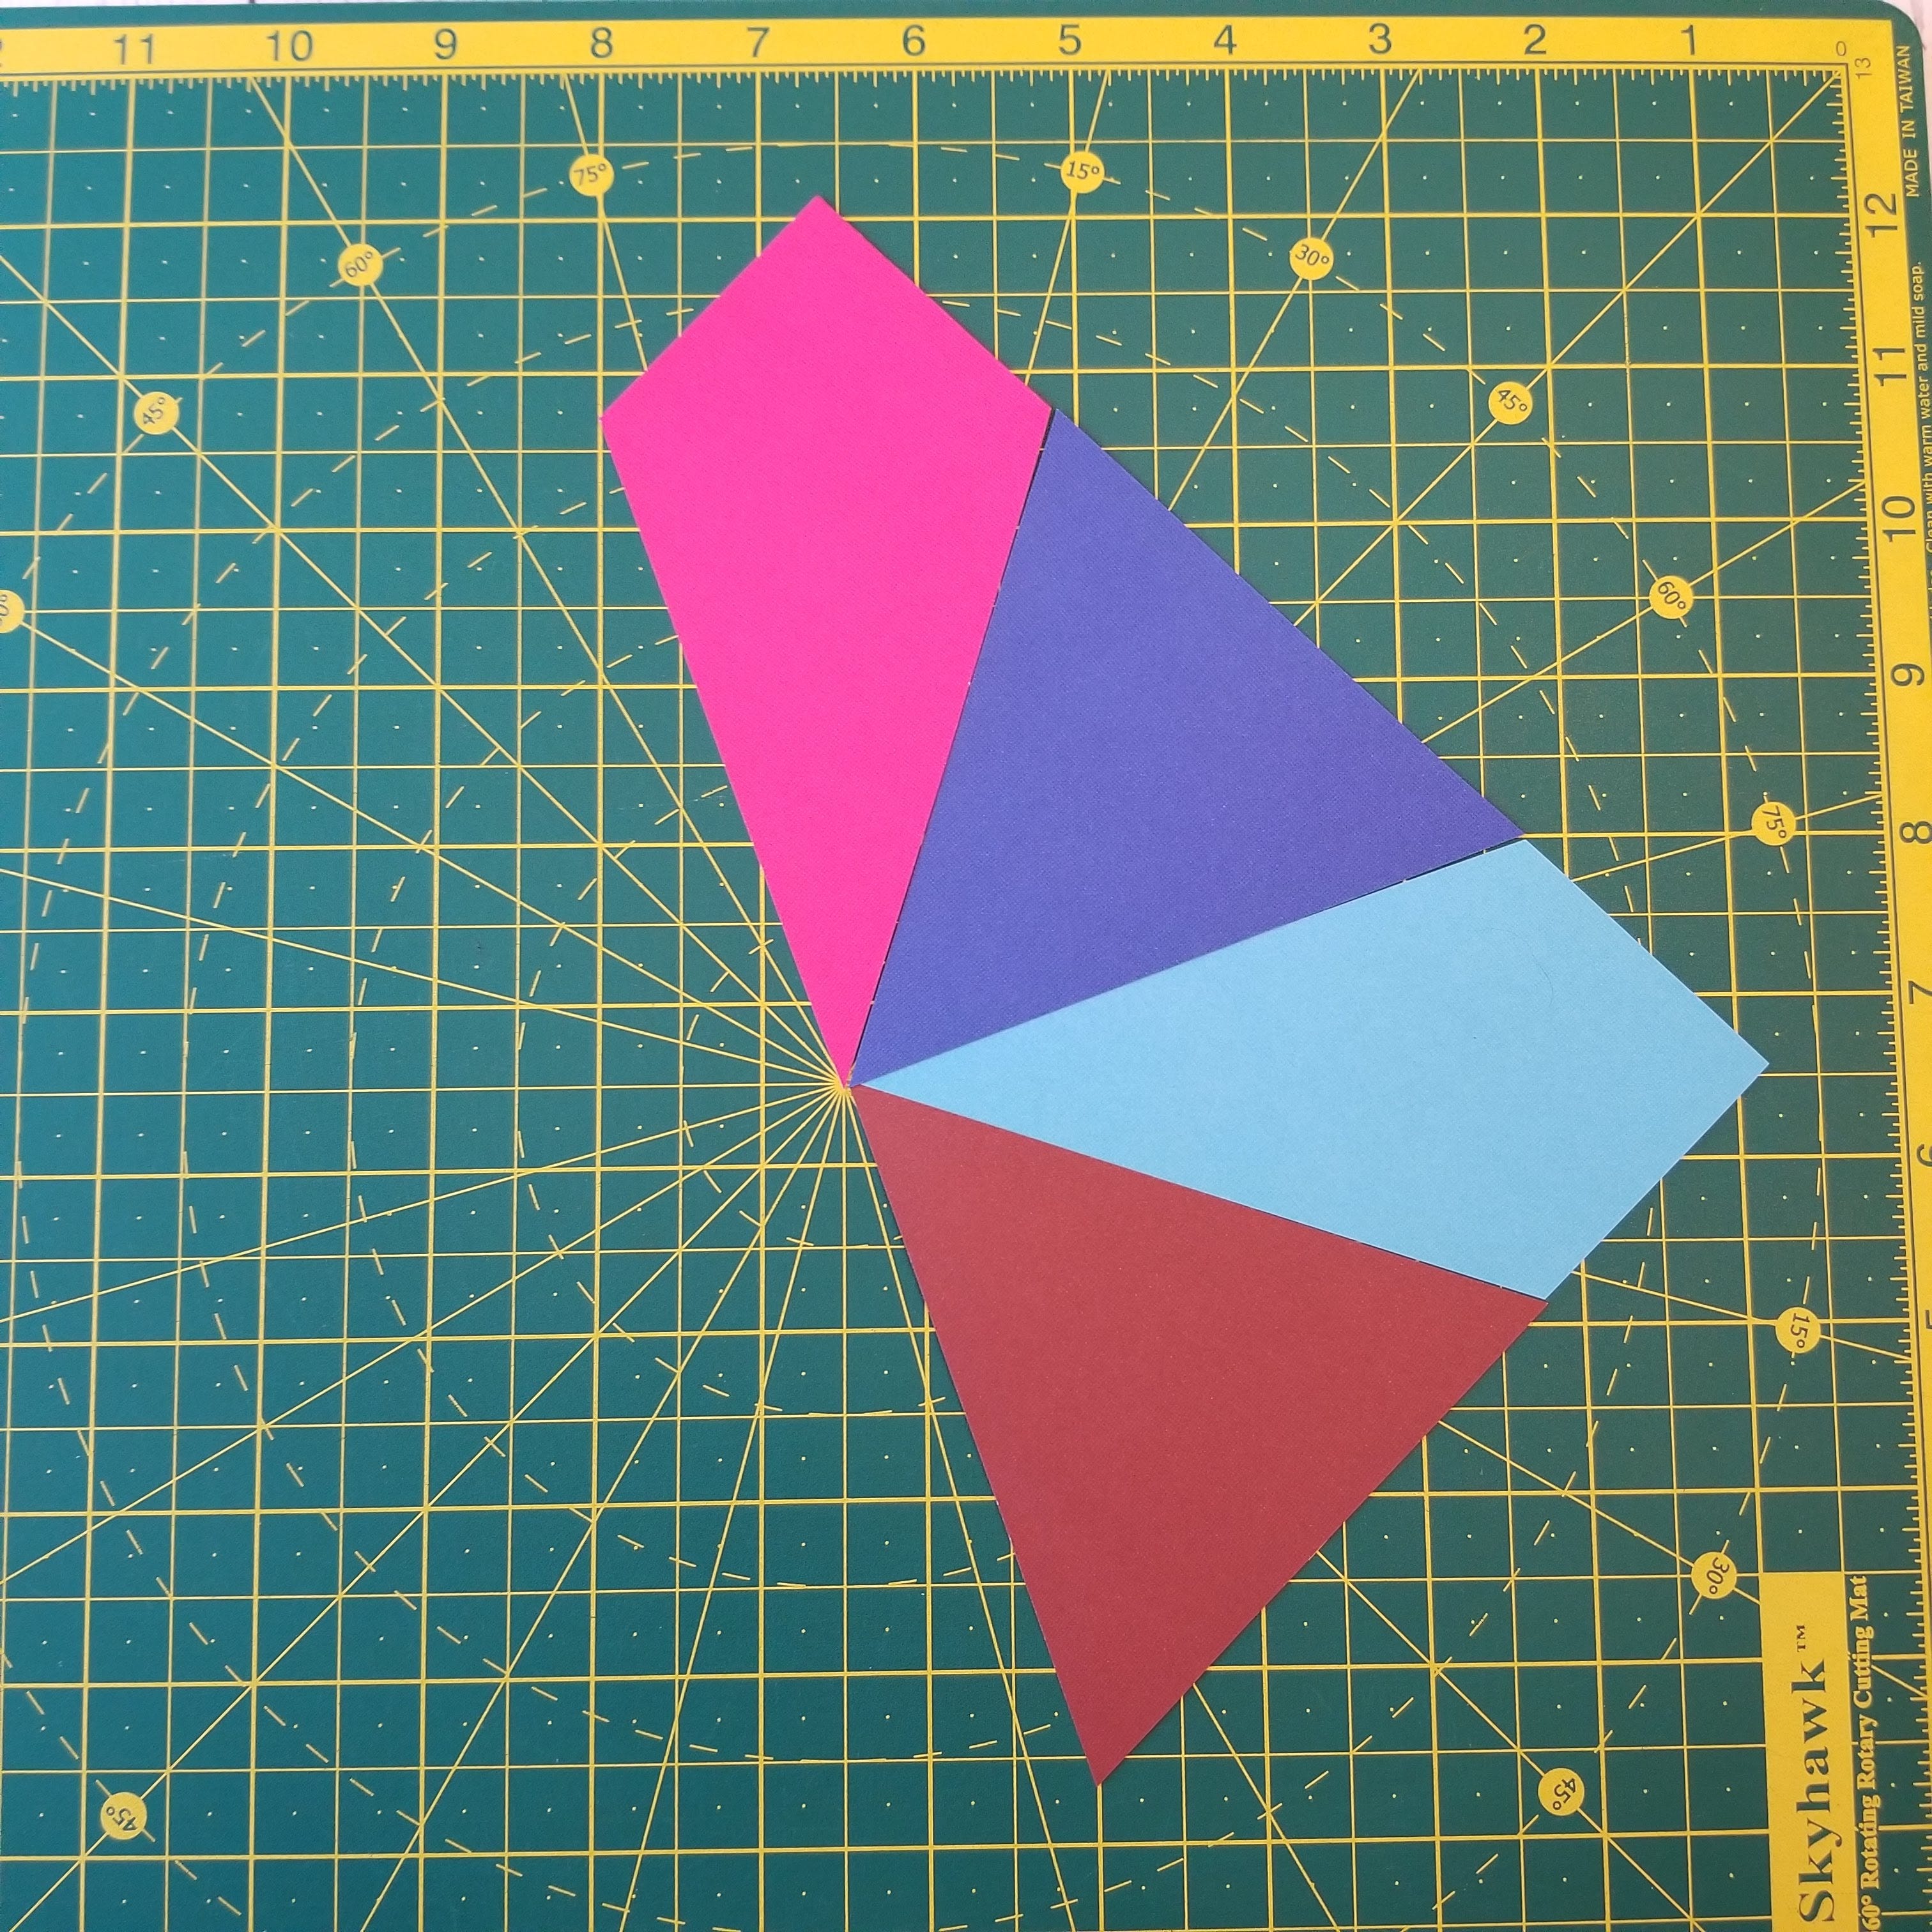 Half a quilt block made up of kite shapes and triangles on self healing cutting mat